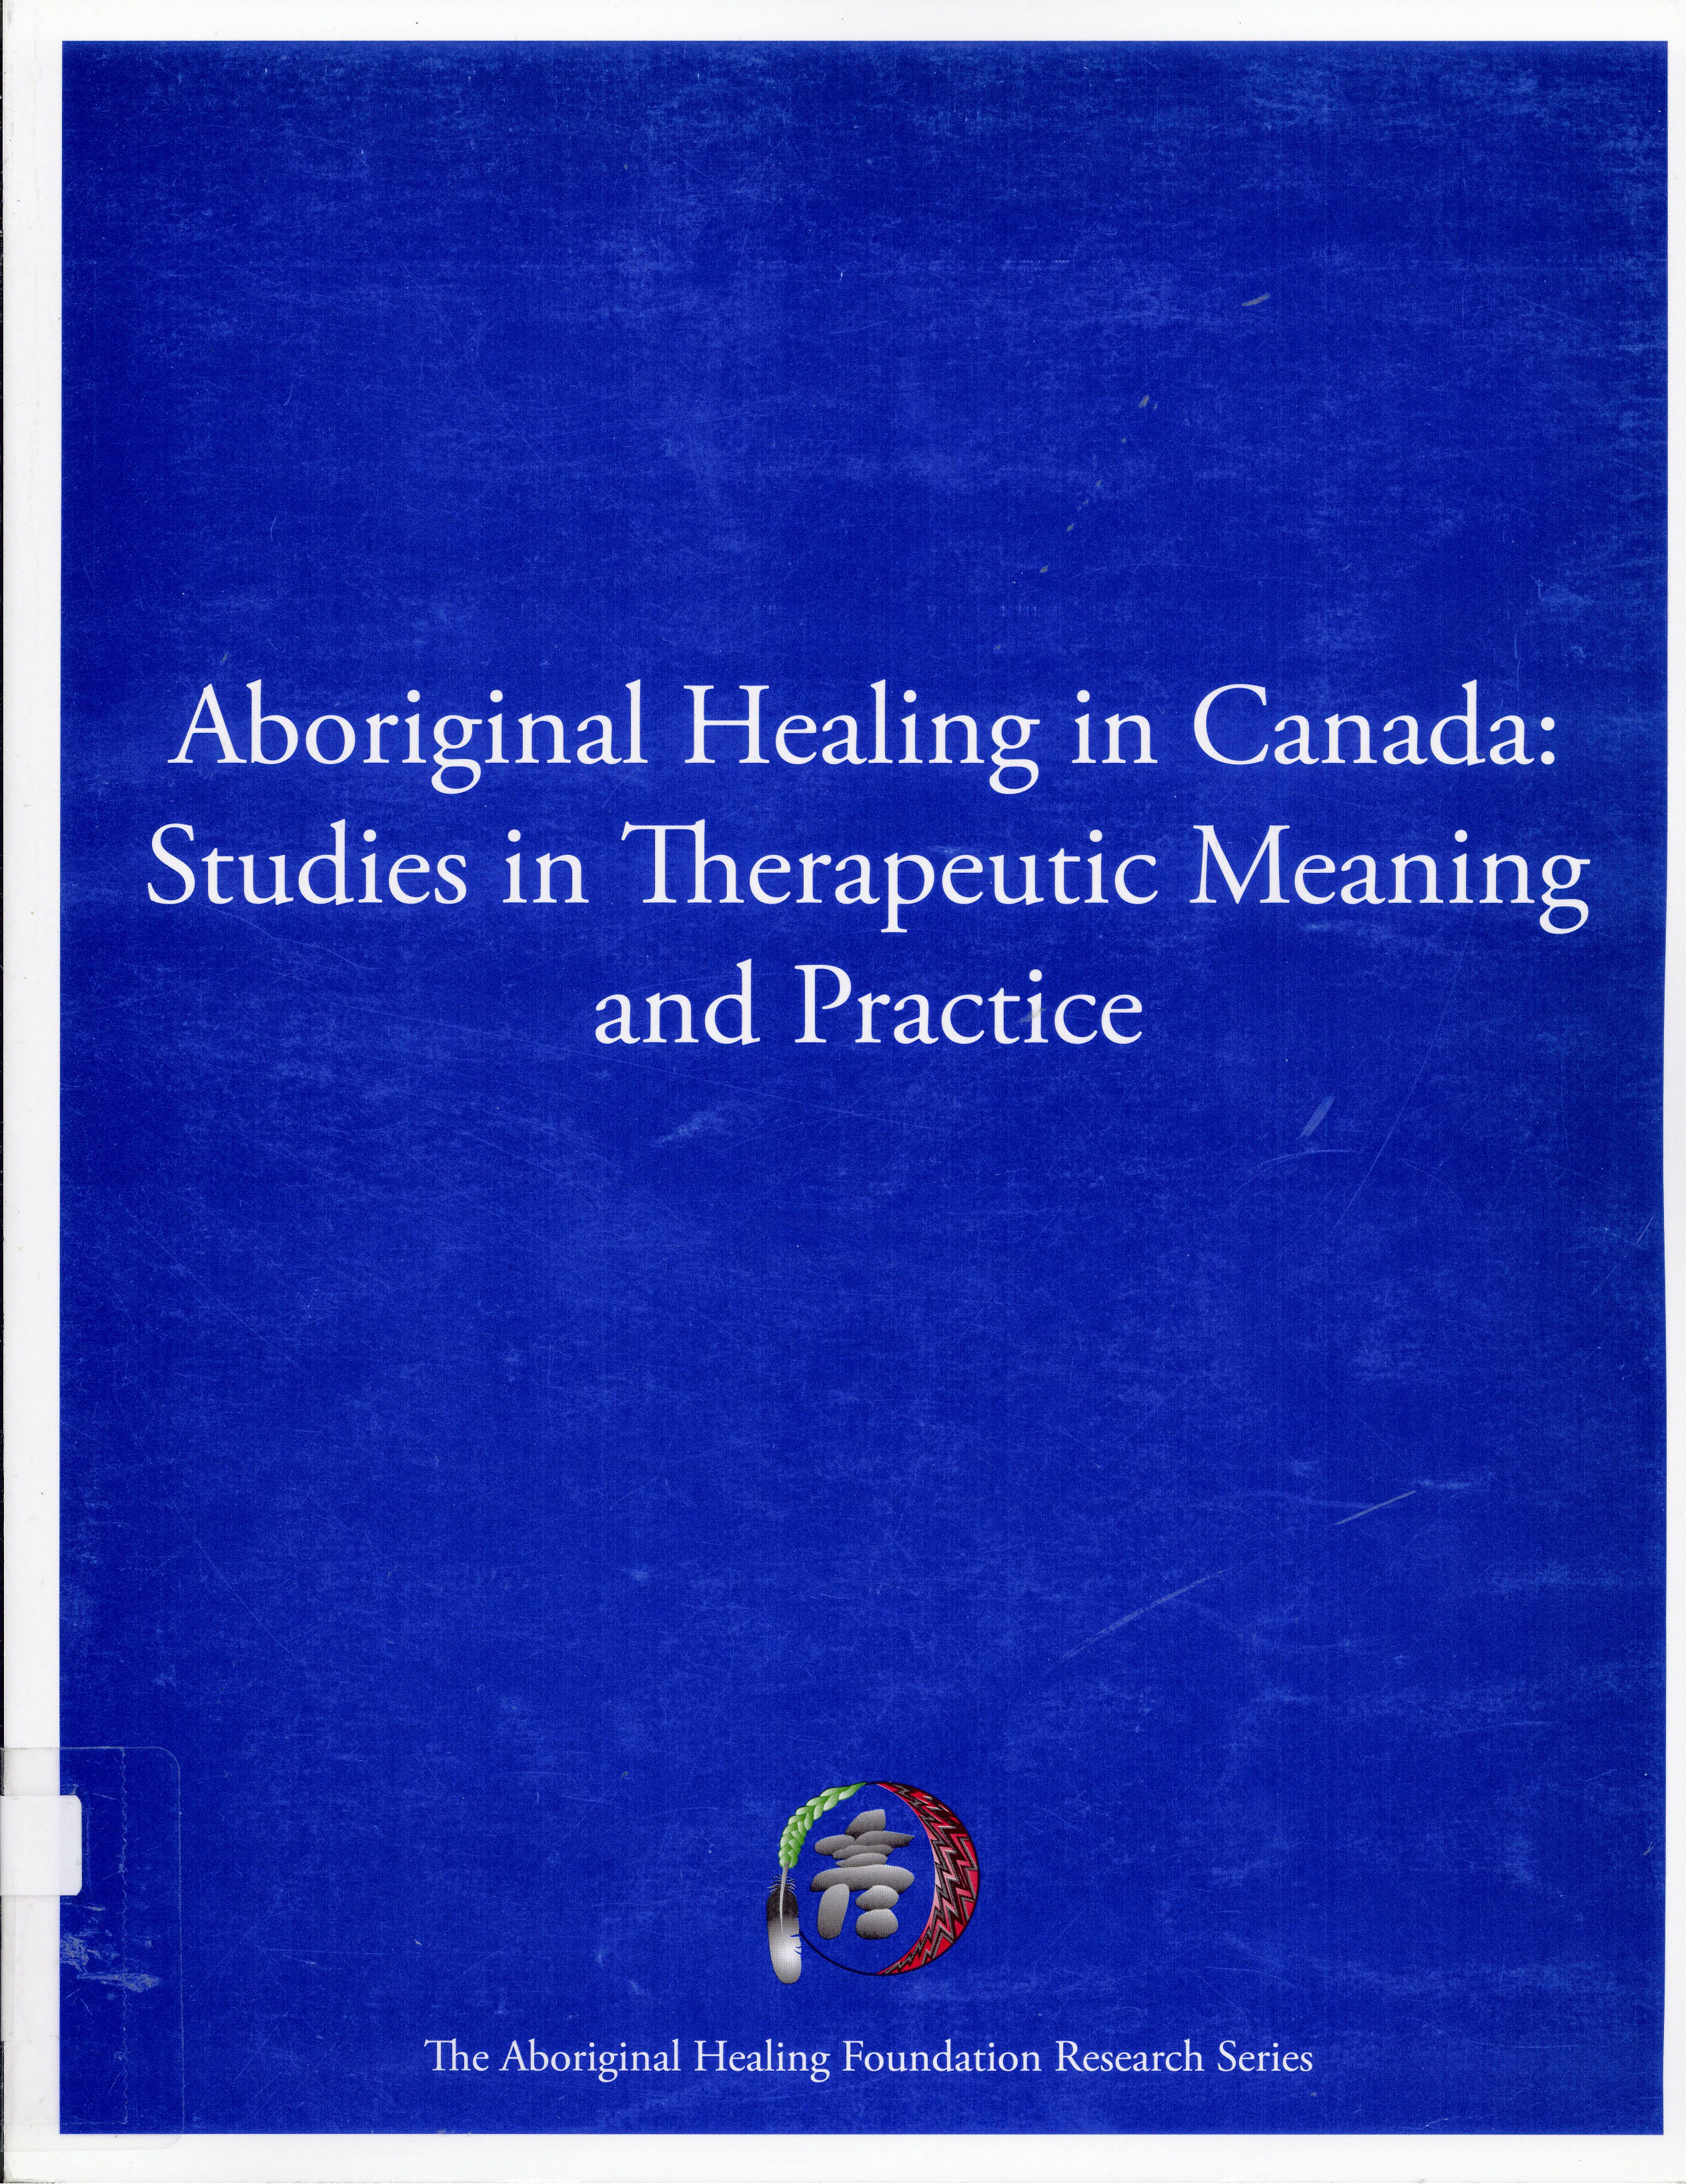 Aboriginal healing in Canada : studies in therapeutic meaning and practice